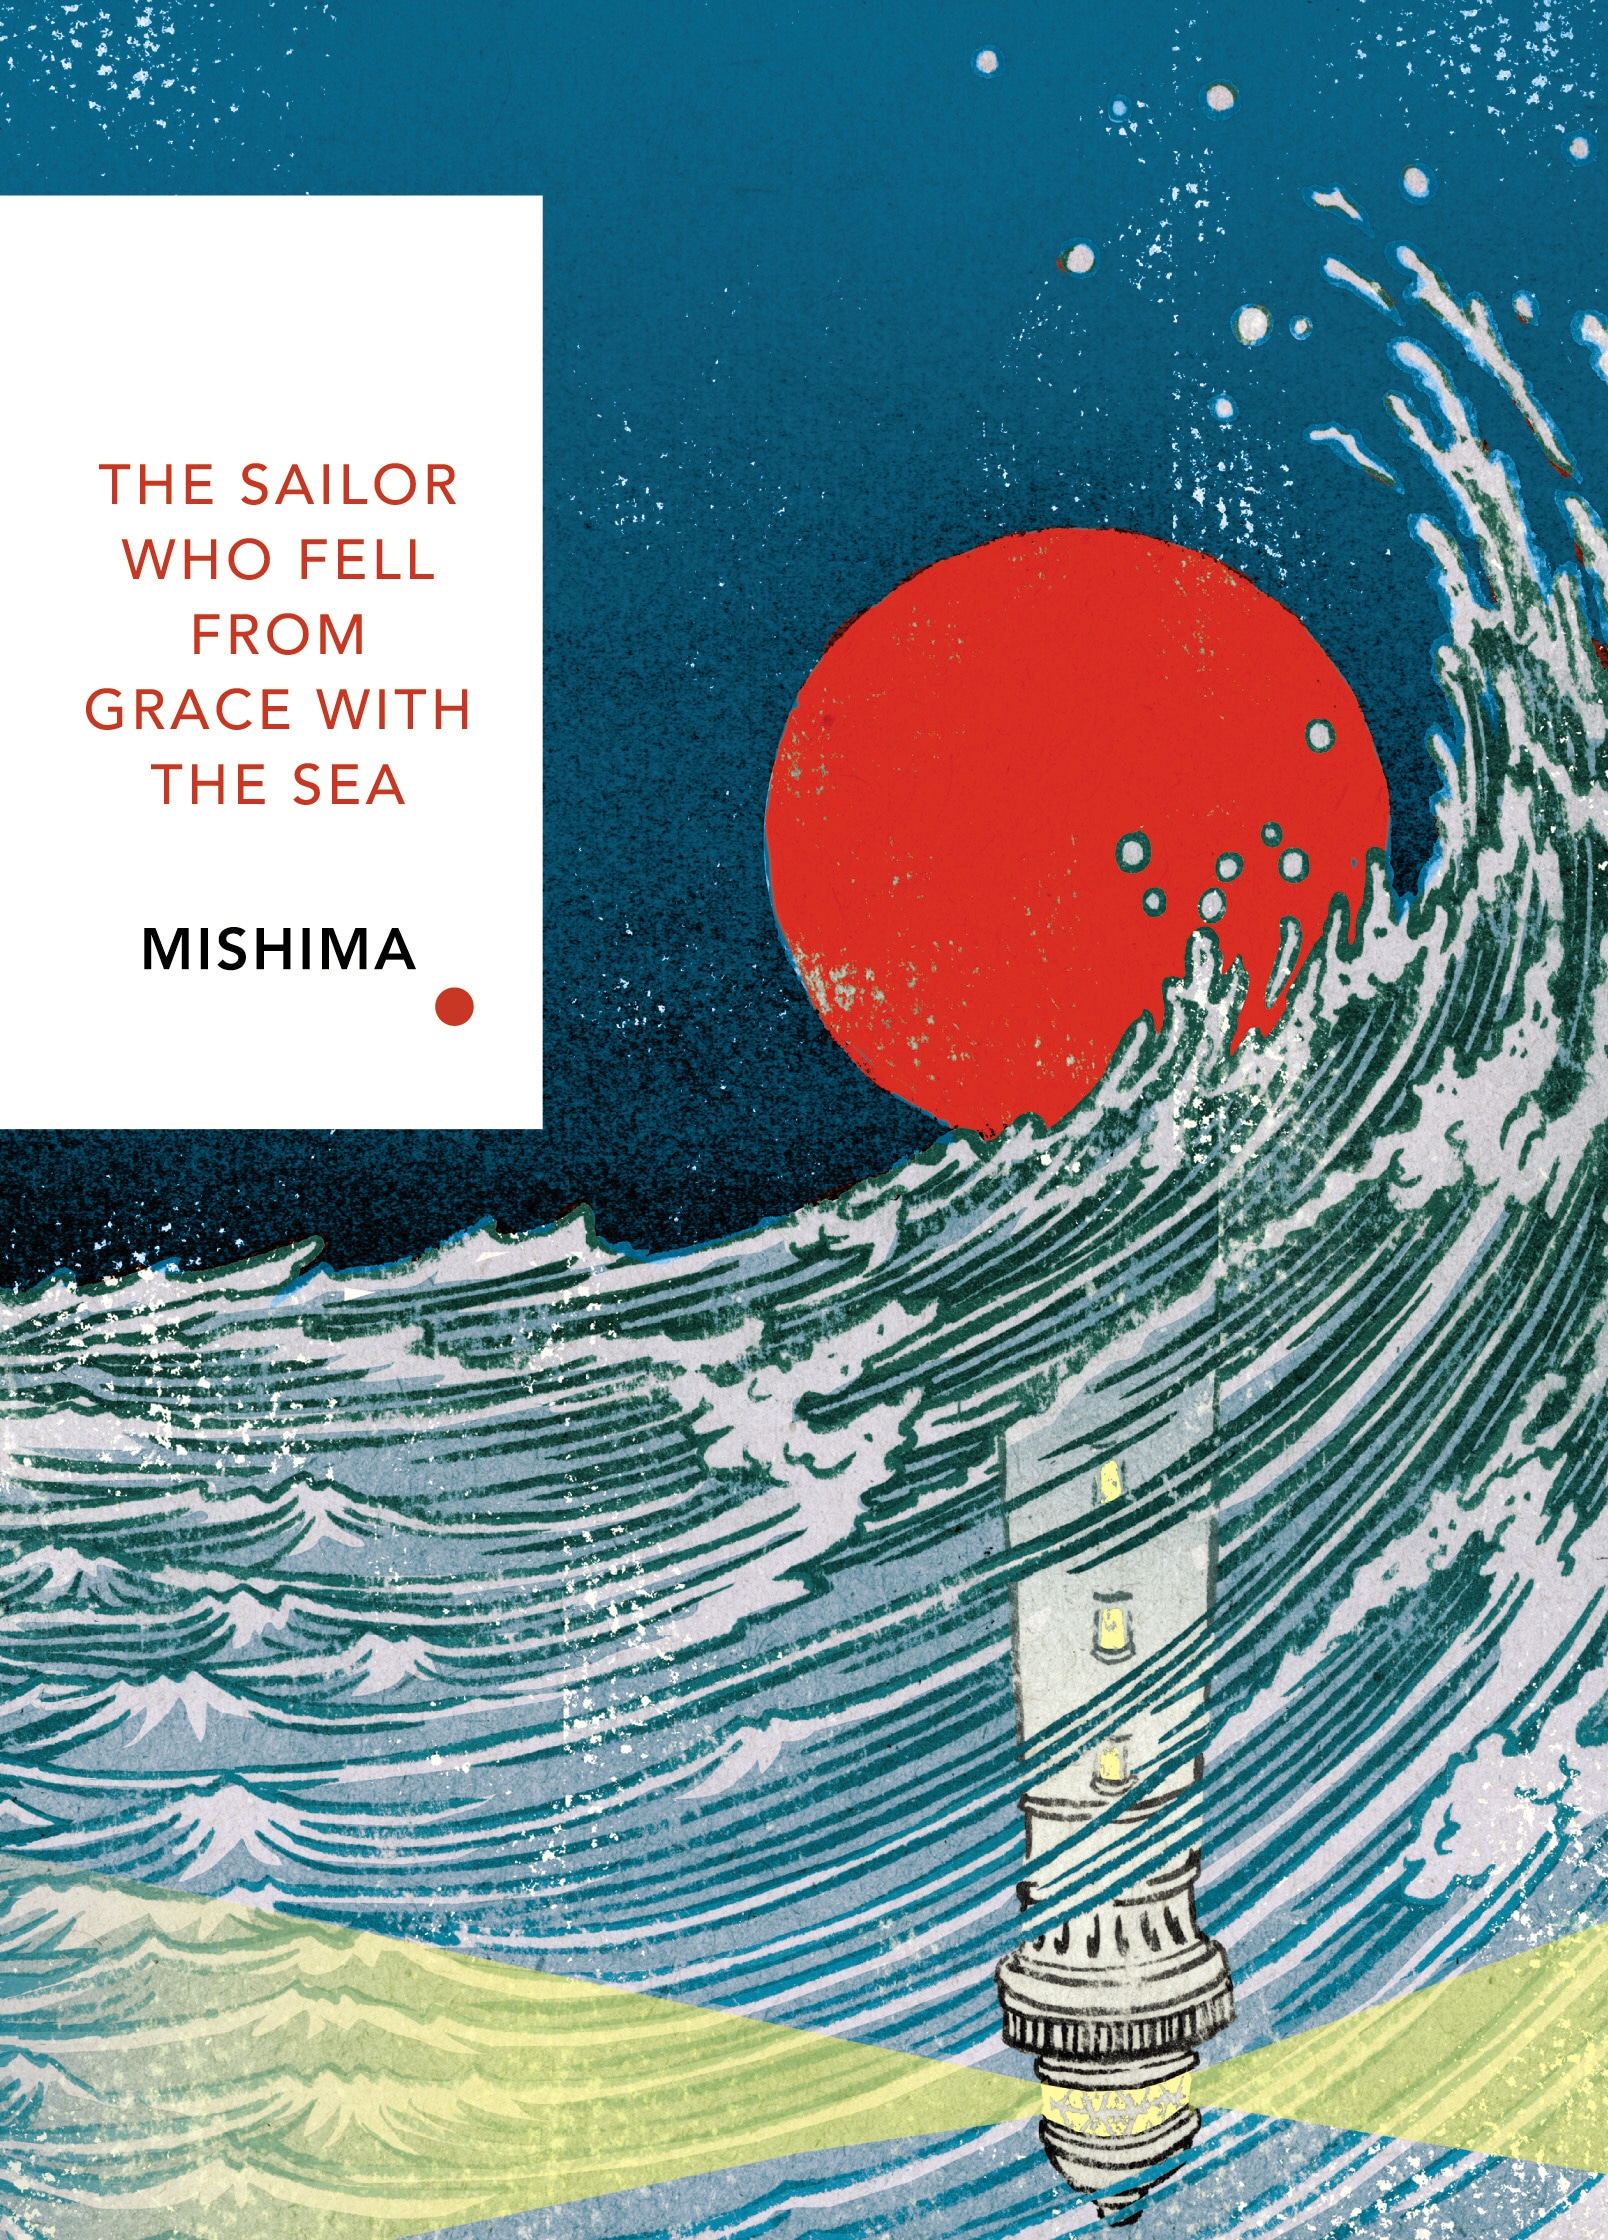 Book “The Sailor Who Fell from Grace With the Sea (Vintage Classics Japanese Series)” by Yukio Mishima — October 3, 2019